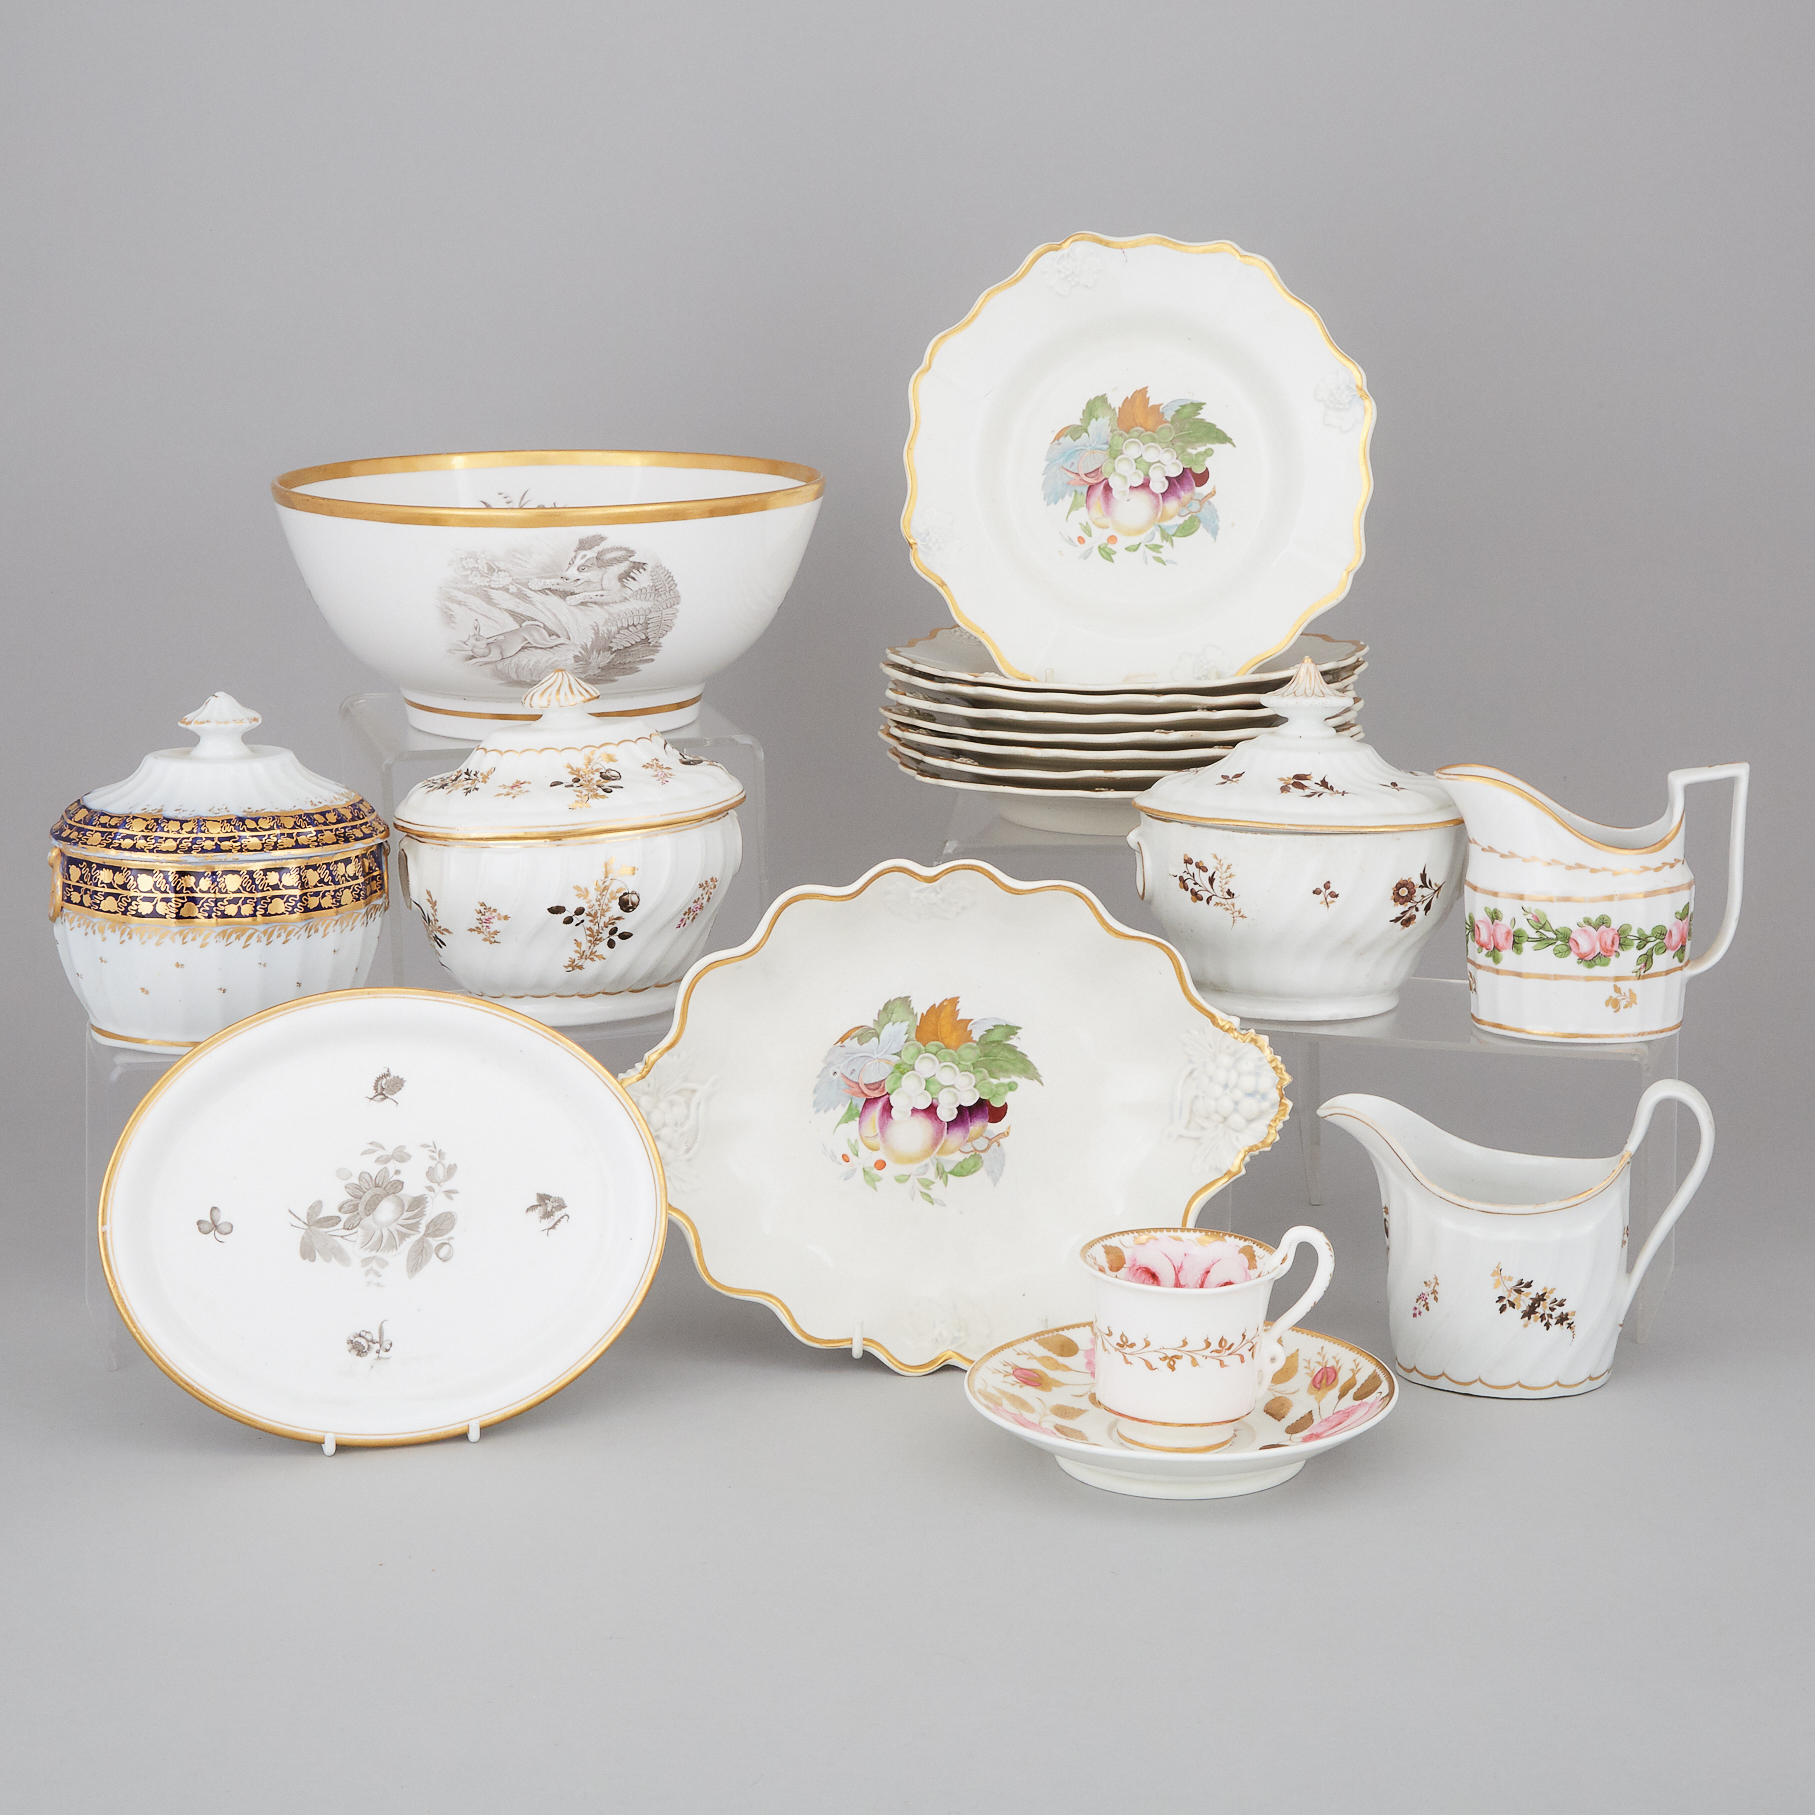 Group of English Pottery and Porcelain, late 18th/early 19th century